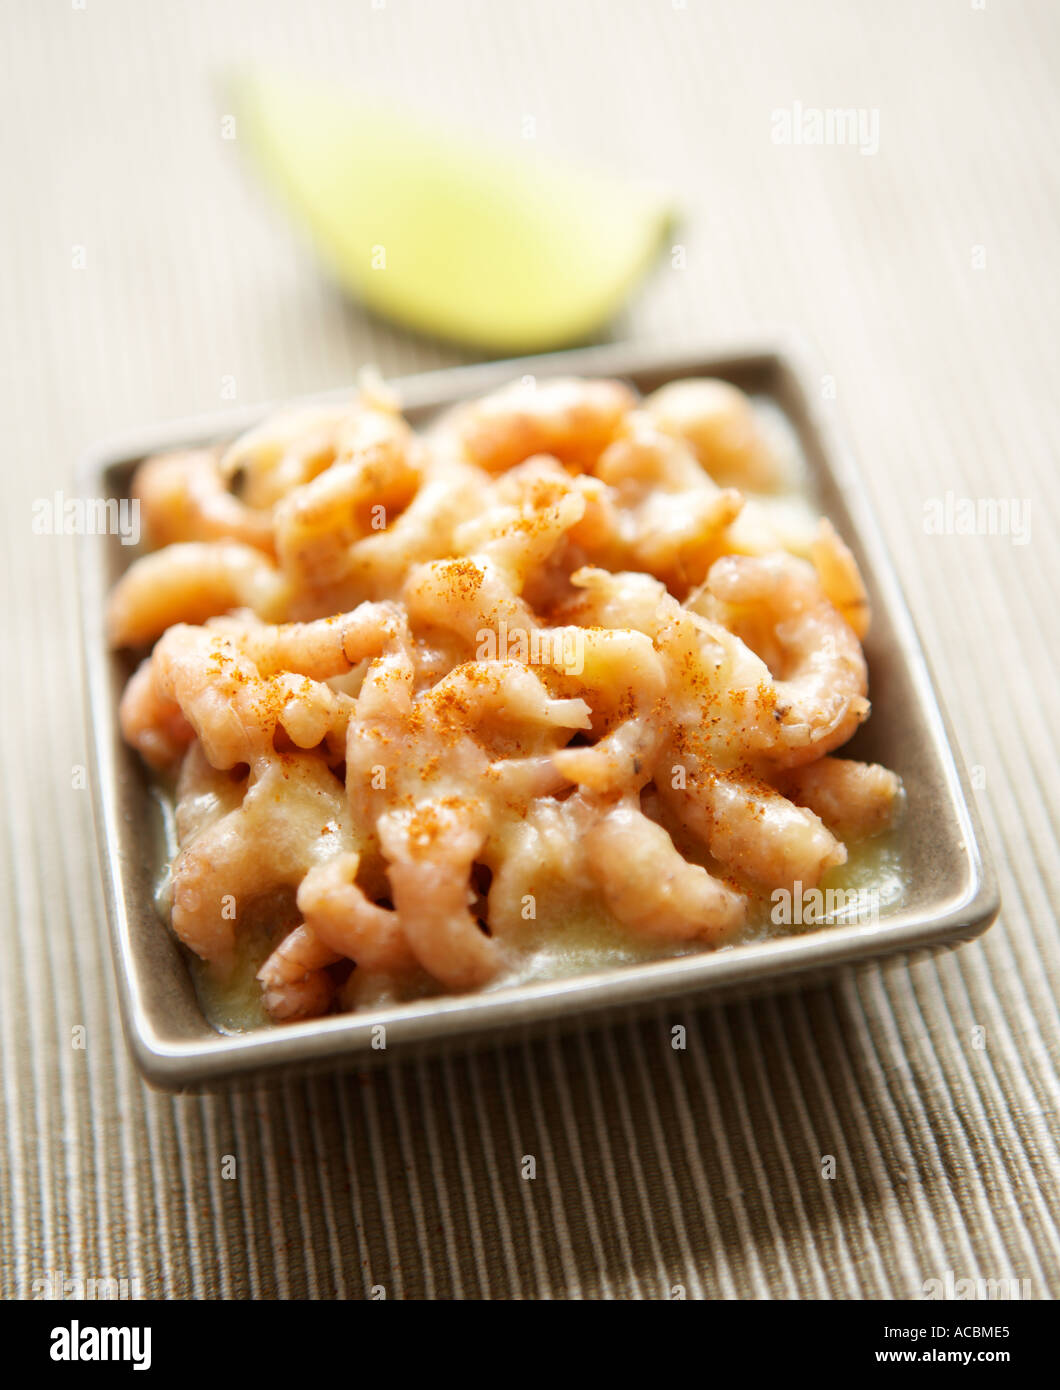 Potted Shrimps in a square dish with a wedge of Lime Stock Photo